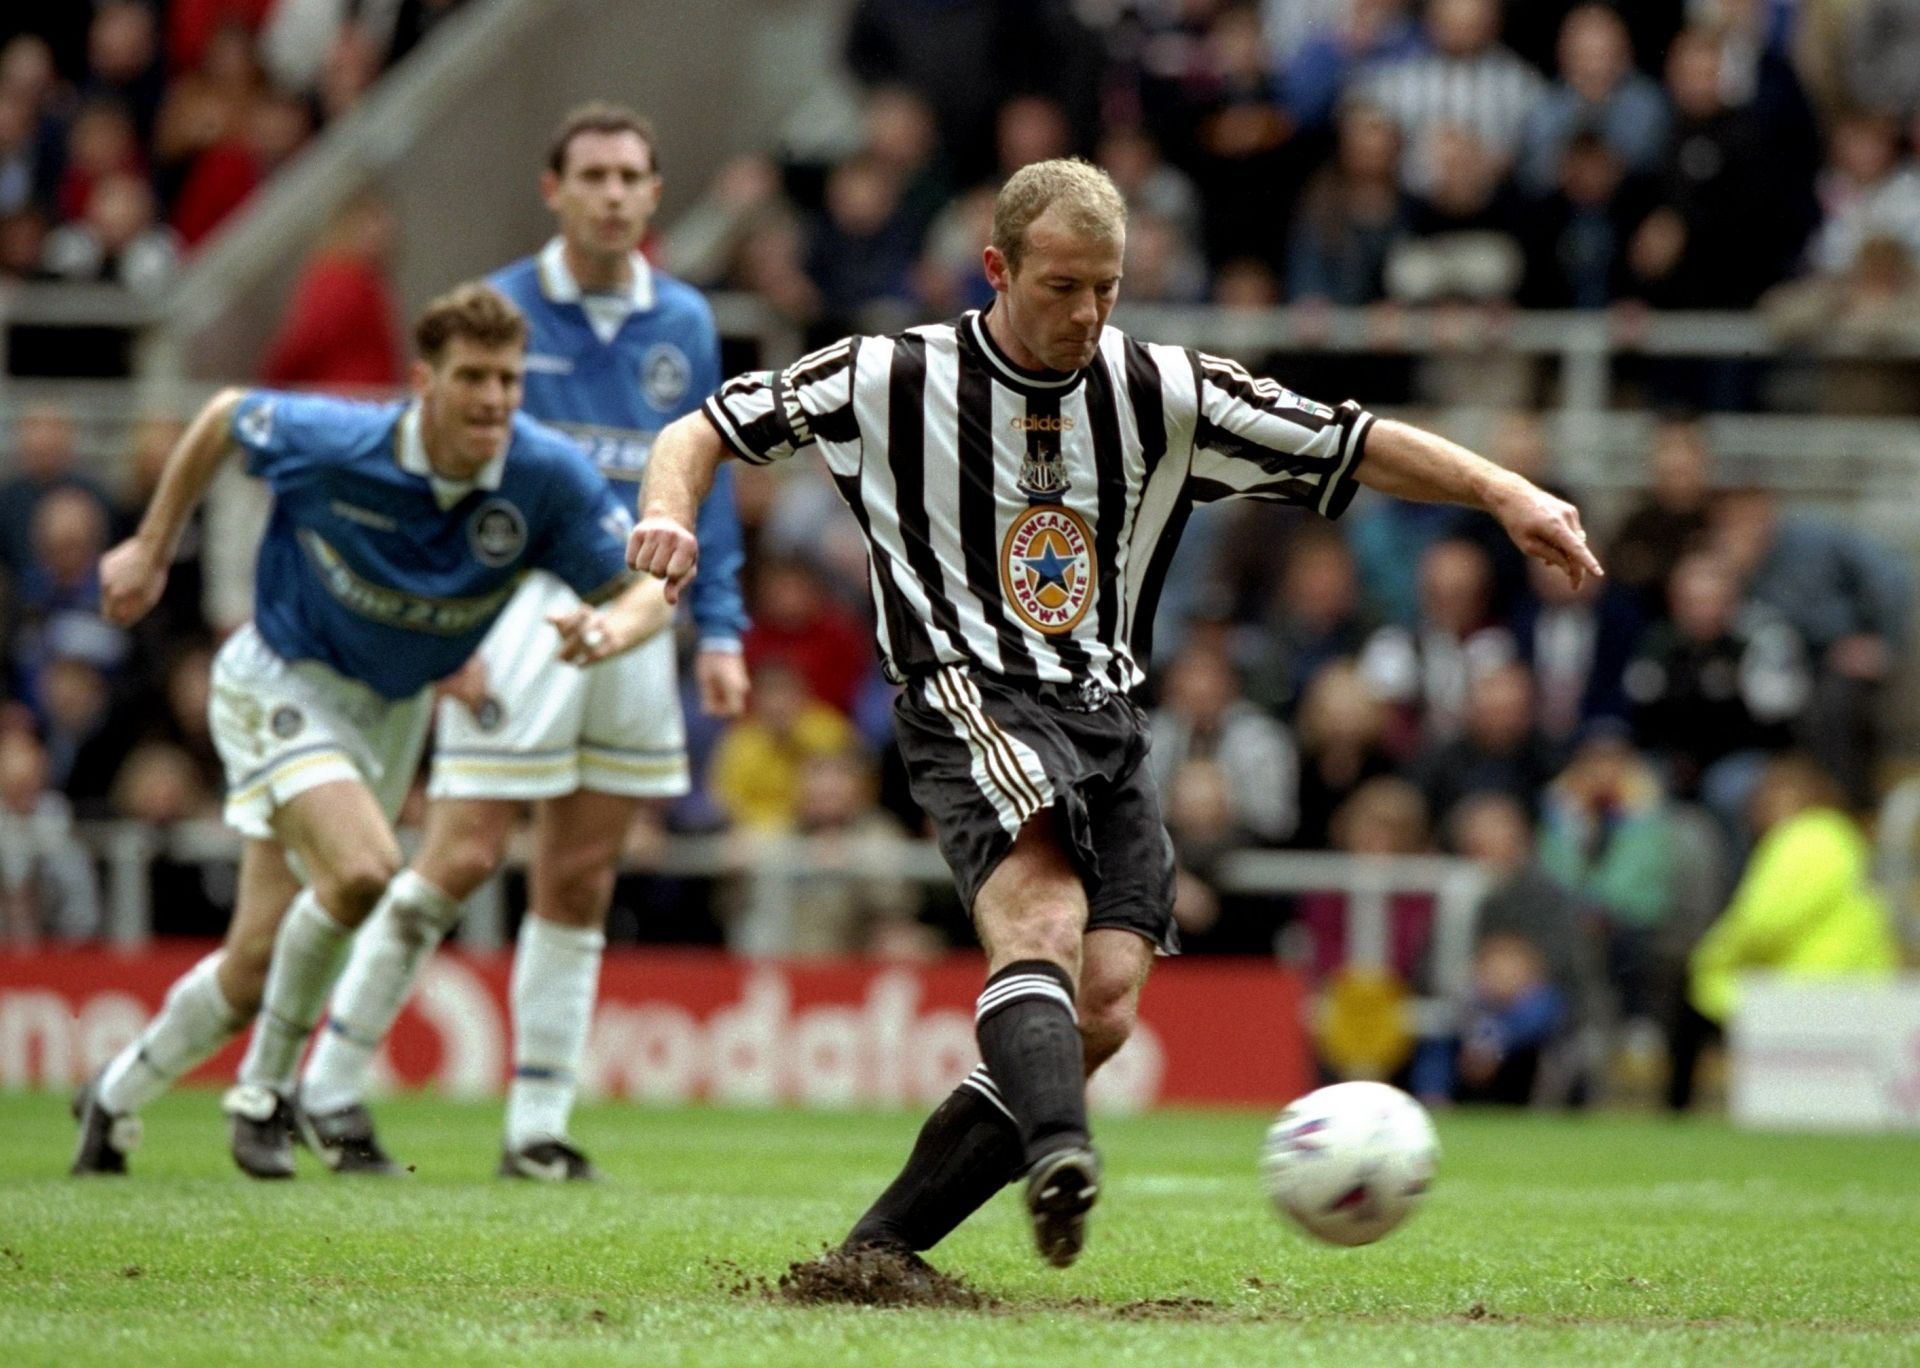 Alan Shearer in action for Newcastle United